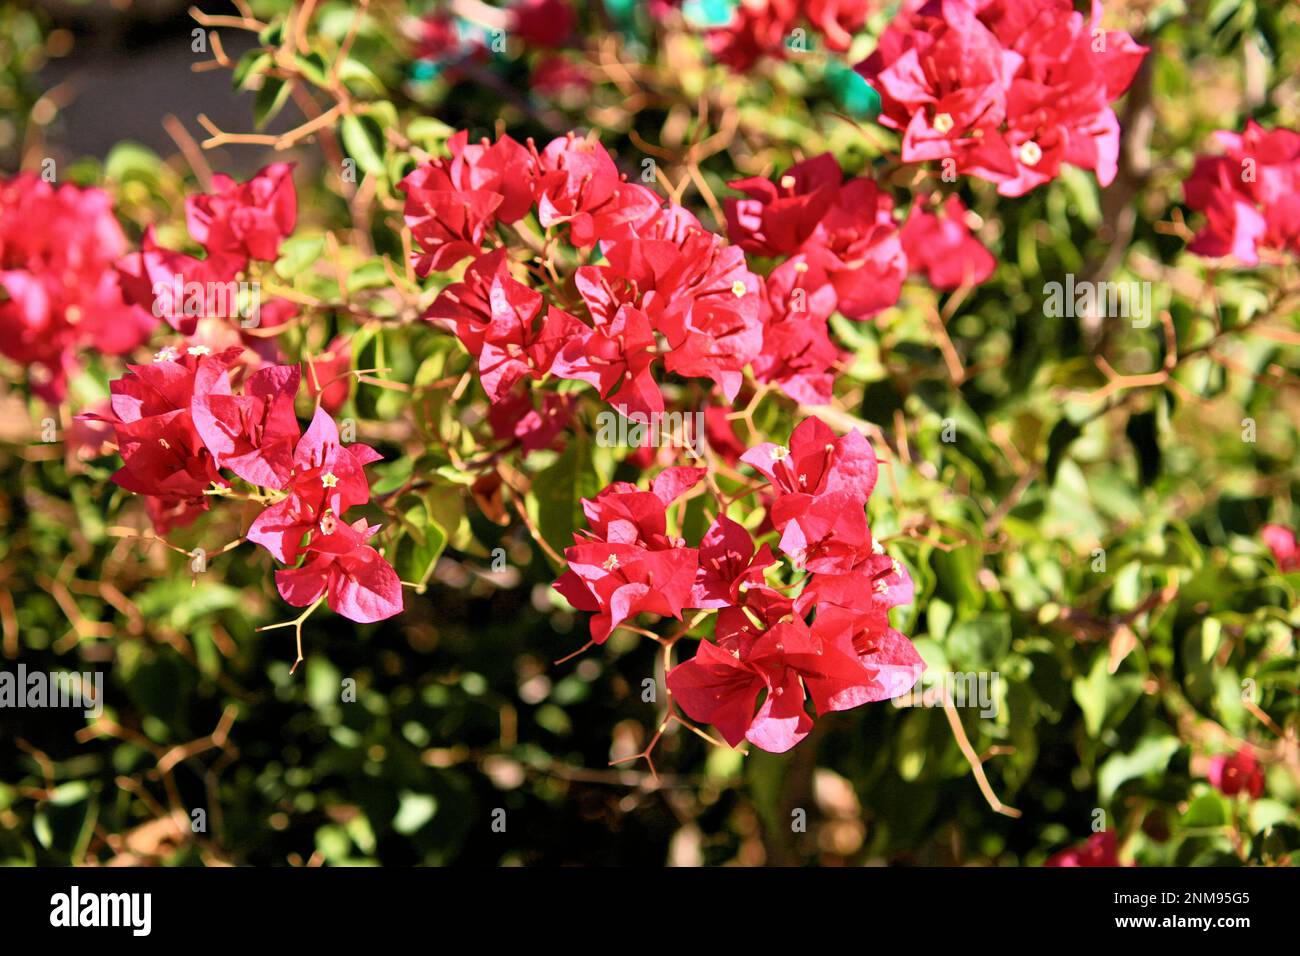 red flowers blooming Stock Photo